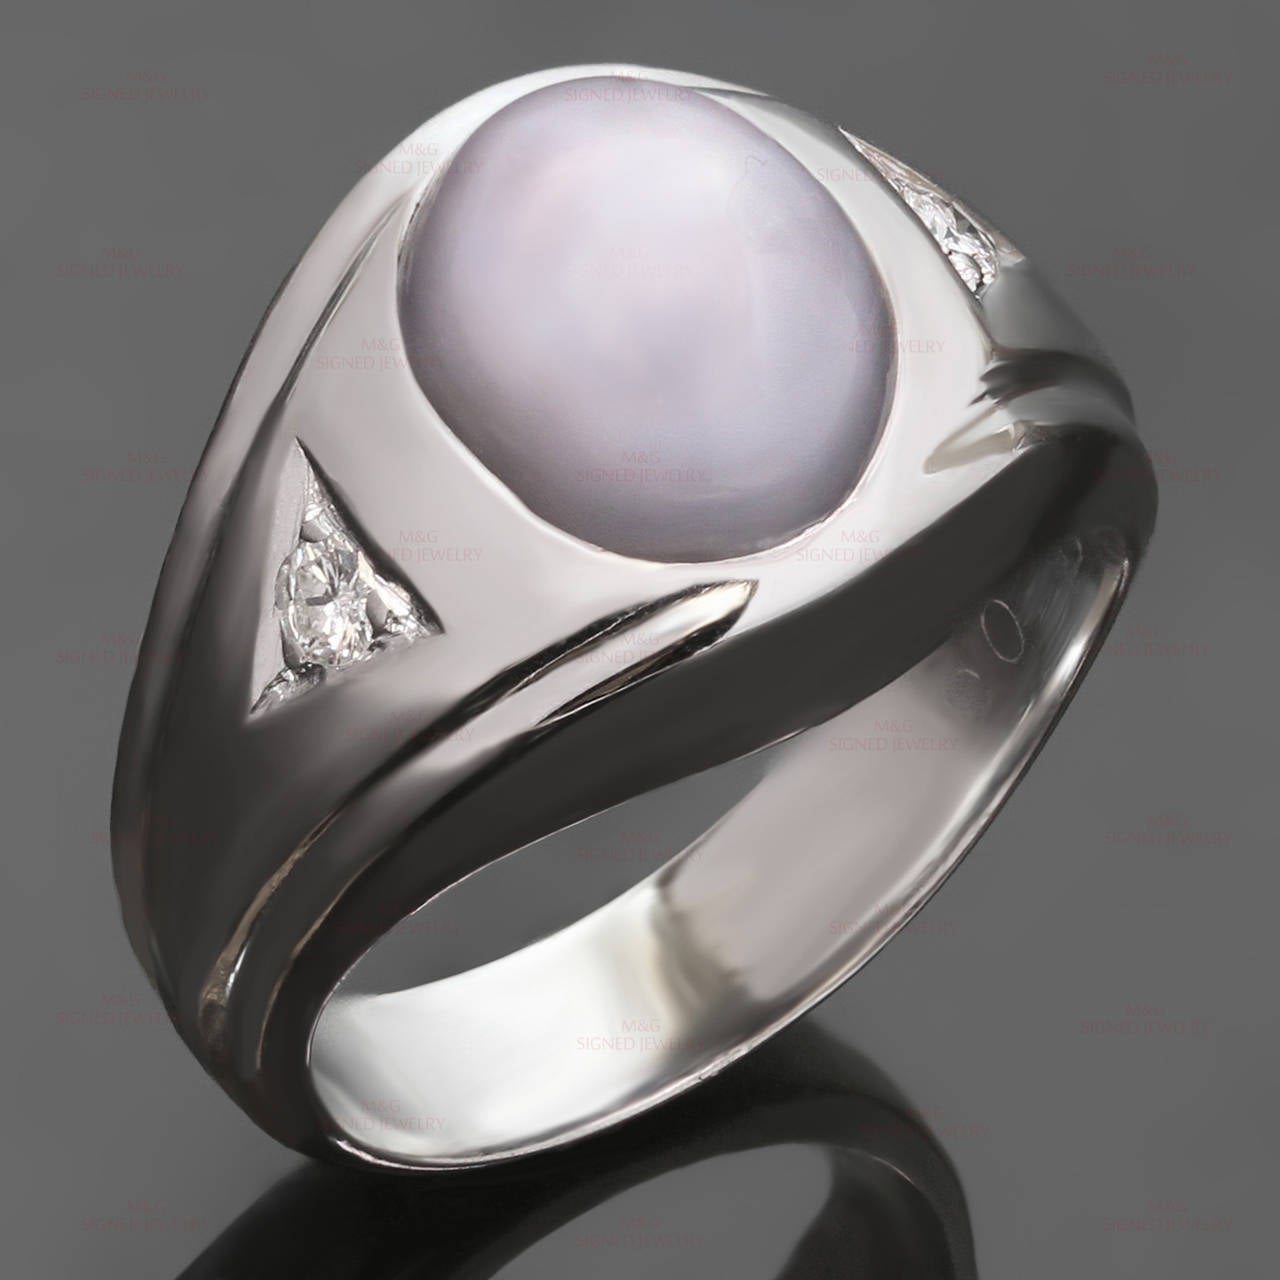 This classic ring is crafted in 14k white gold and set with an oval 8.0mm x 10.0mm x 7.6mm grayish-purplish star sapphire approximate 6.5ct - 7.0ct. accented on sides with brilliant-cut round H-I VS1-VS2 diamonds of an estimated 0.12 carats. Made in